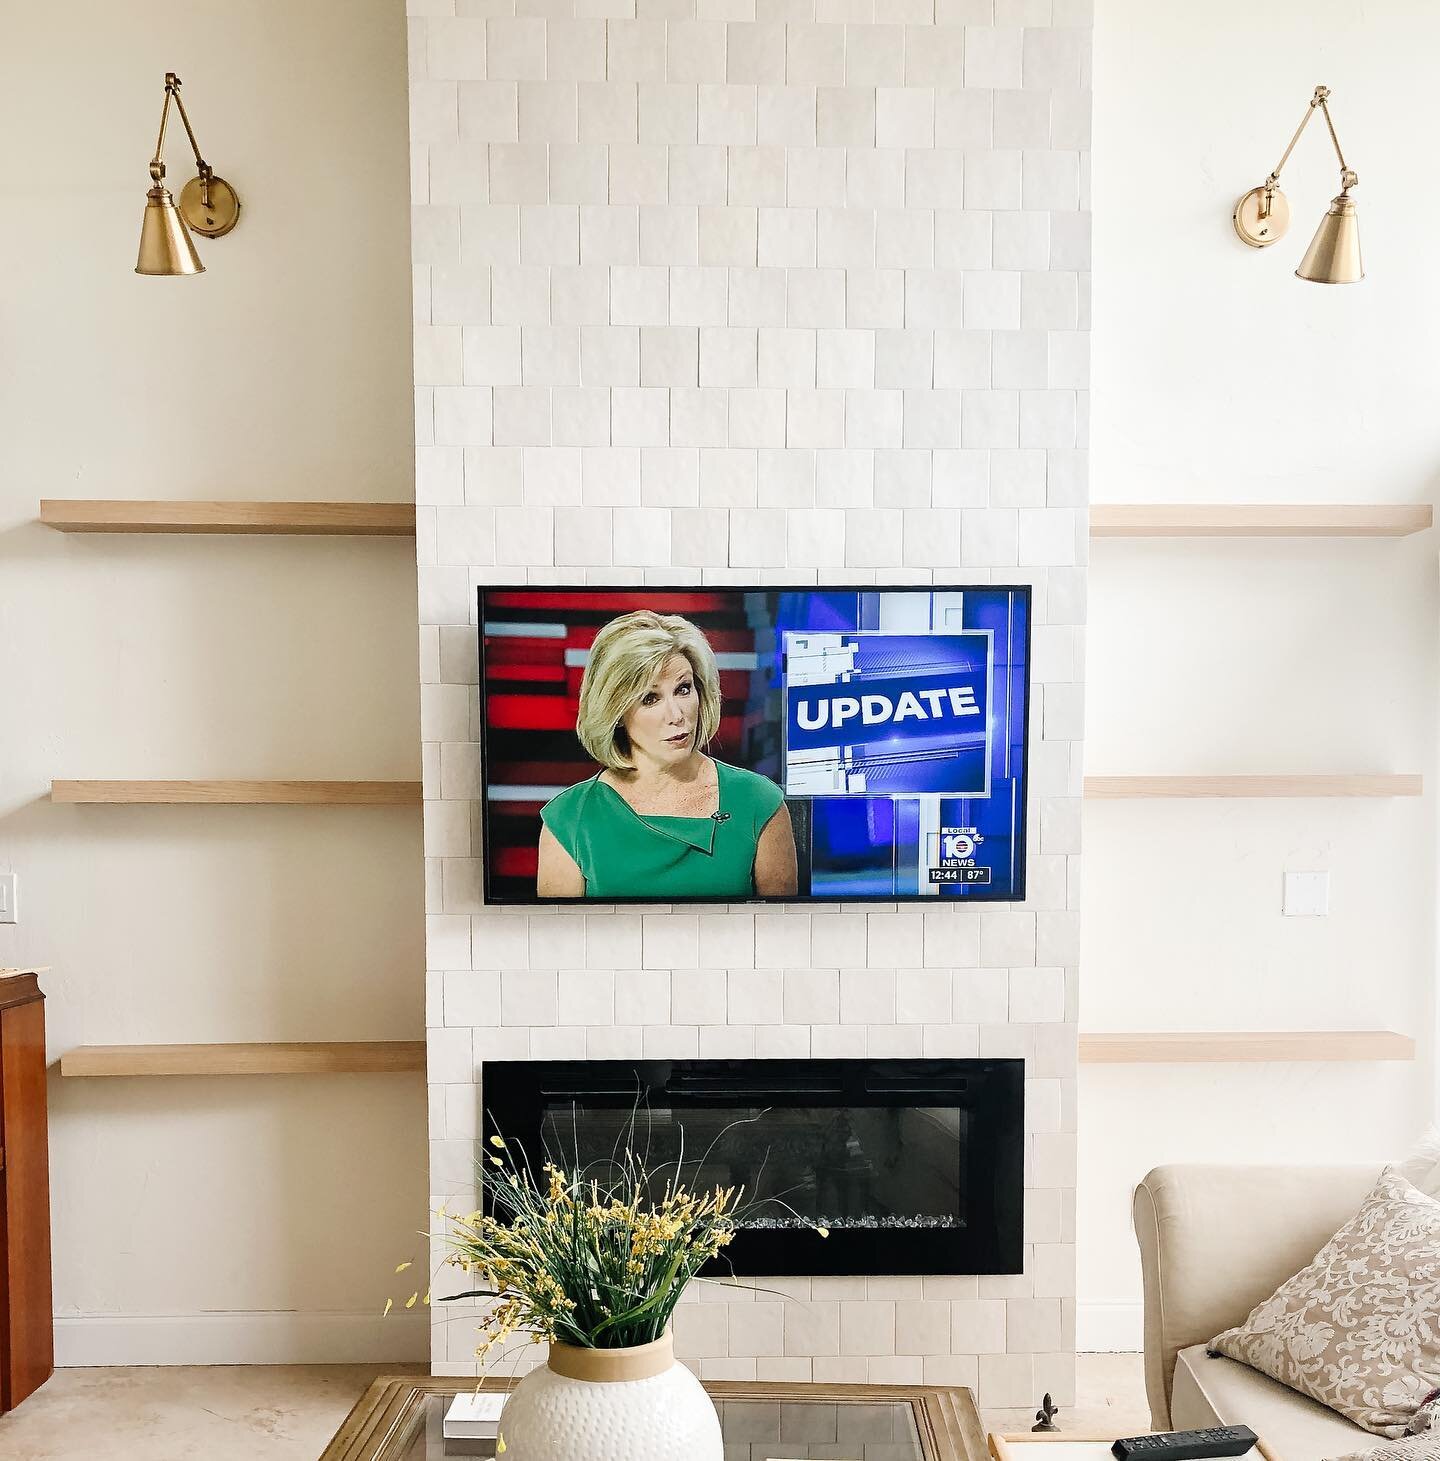 When the news finally gets it right 😂 (had to) Update indeed!! Just installed these custom wood beauties over at #clientmamagetsanupgrade for all the shelfie love to come. You guys, this 2 story tall fireplace tiled in gorgeous @bedrosianstile is su